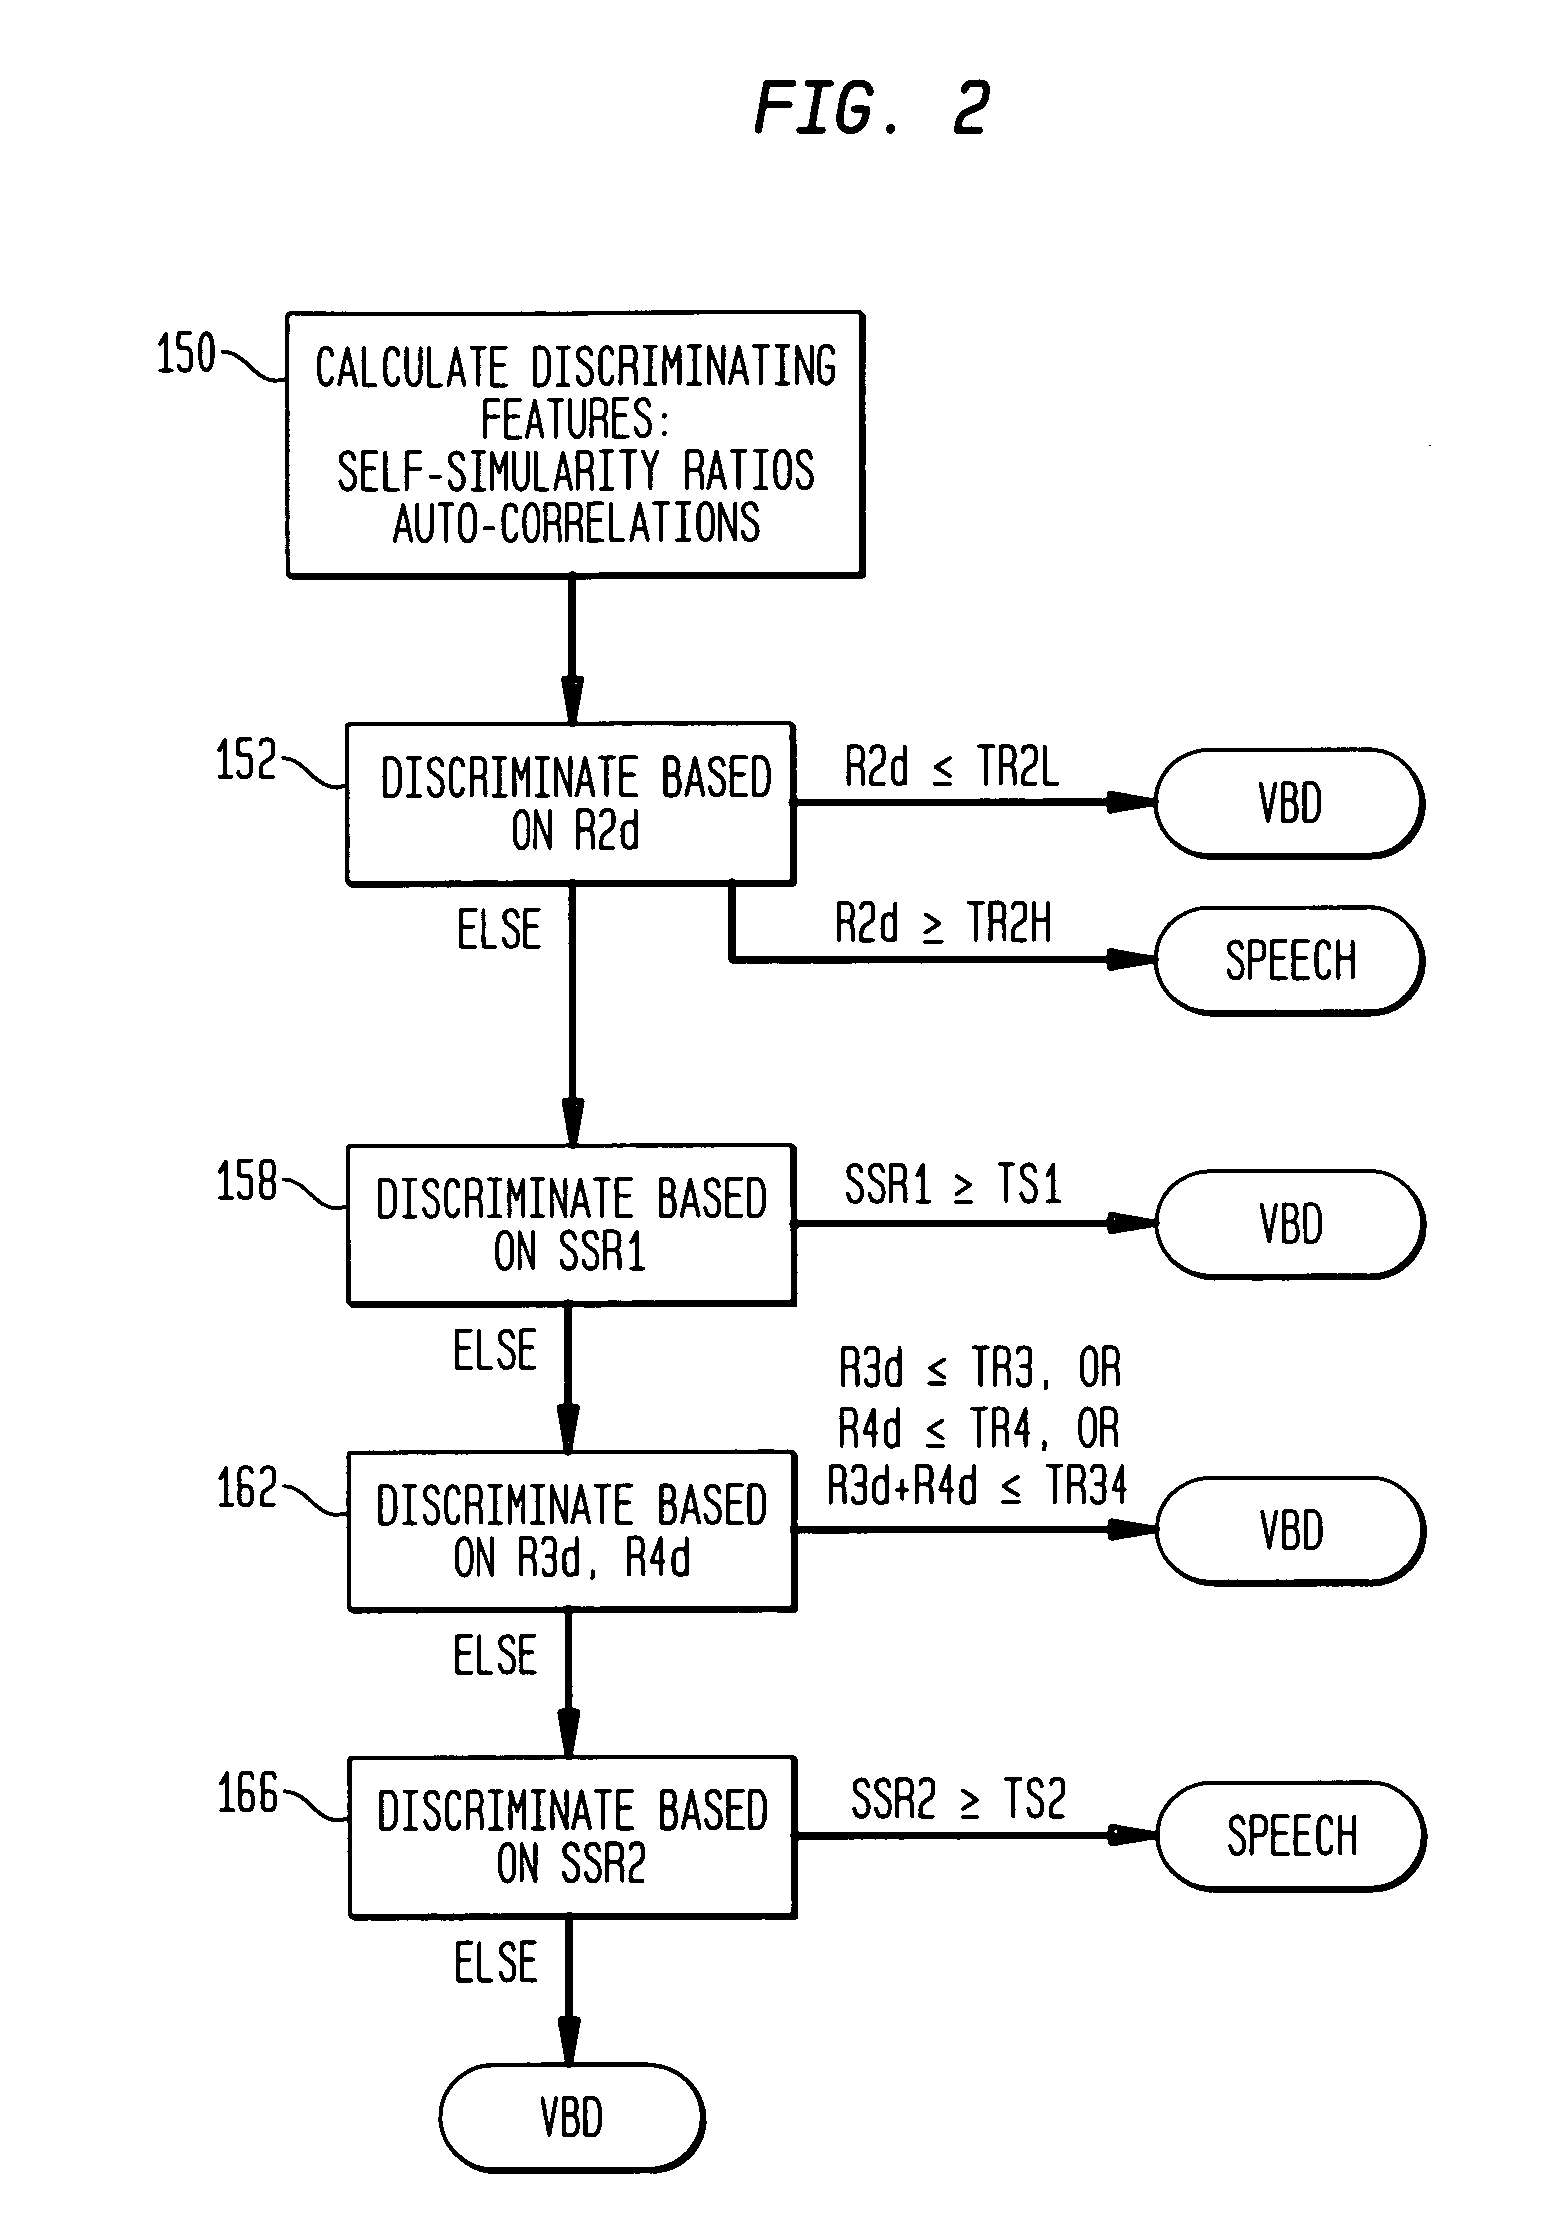 Method and apparatus for discriminating speech from voice-band data in a communication network